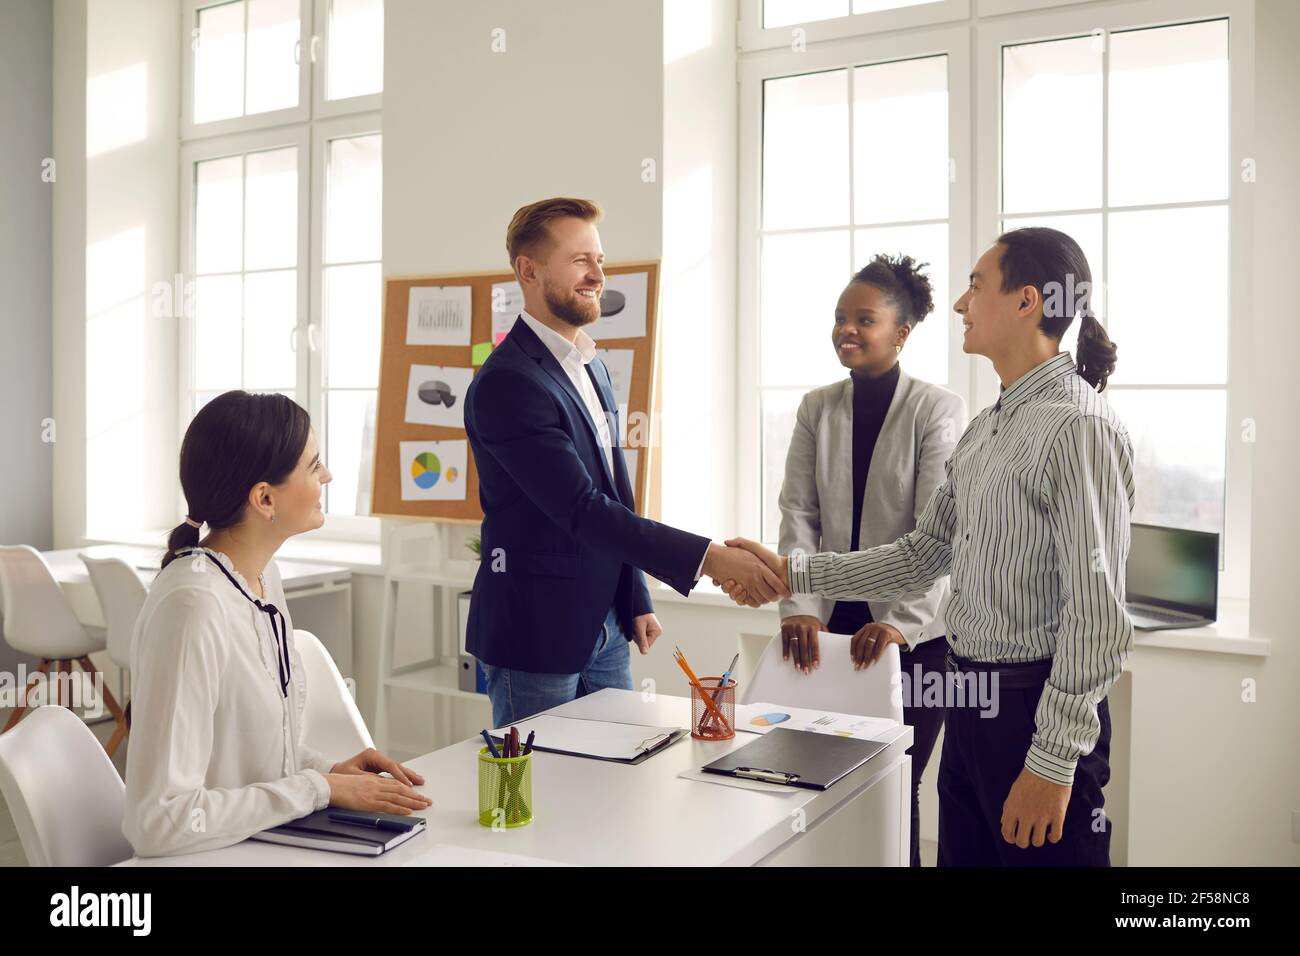 Agreement, successful negotiations, business concept Stock Photo